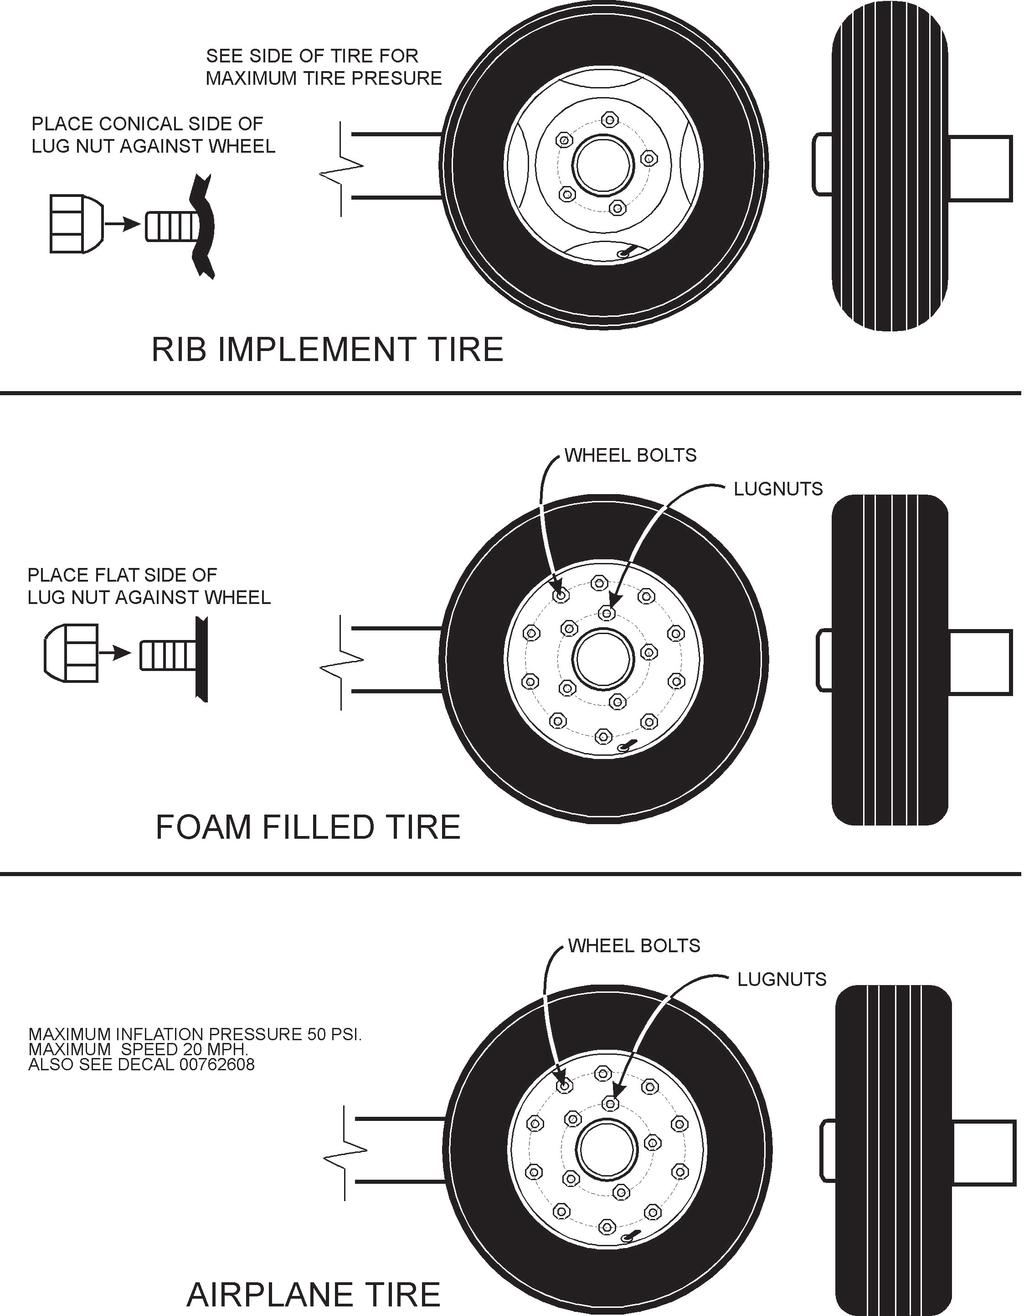 WHEEL AND TIRE ASY -21446 See Side of Tire for Maximum Pressure 1 wheel only 2 Place Conical Side of Lugnut against Wheel Ribbed Implement Tire Install Flat Side of Lug Nut Against